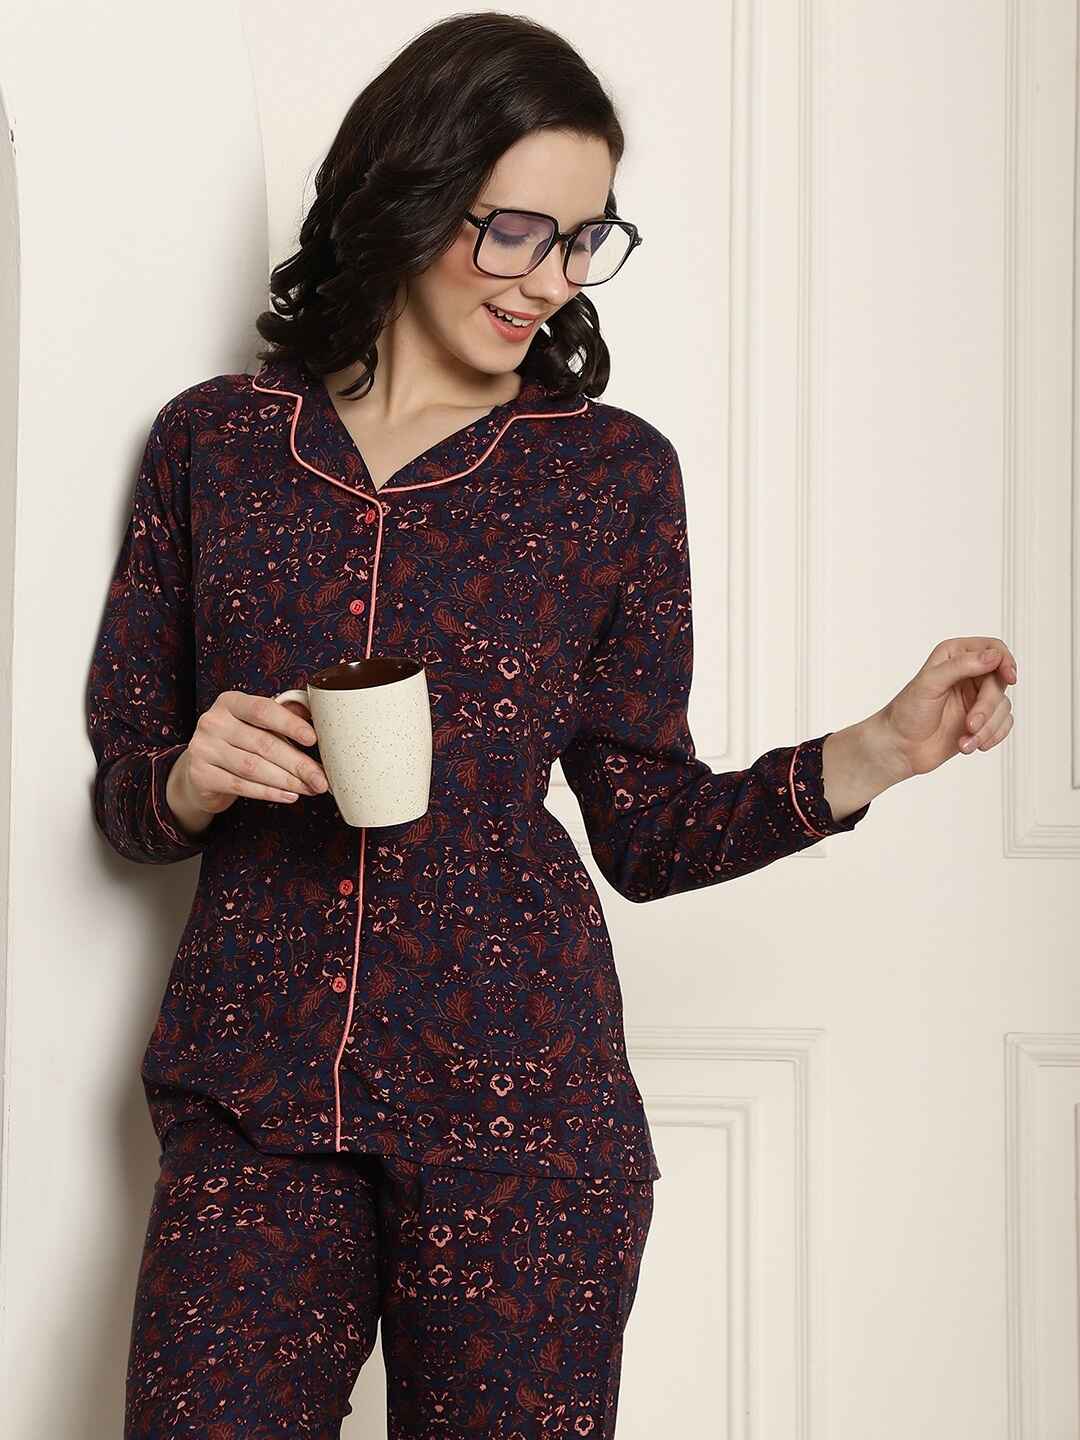 Blue Color Floral Printed Cotton Nightsuit For Night Suit Claura Designs Pvt. Ltd. Nightsuit blue, Floral, Full Sleeves, long sleeves, Nightsuit, Printed, Rayon, Sleepwear